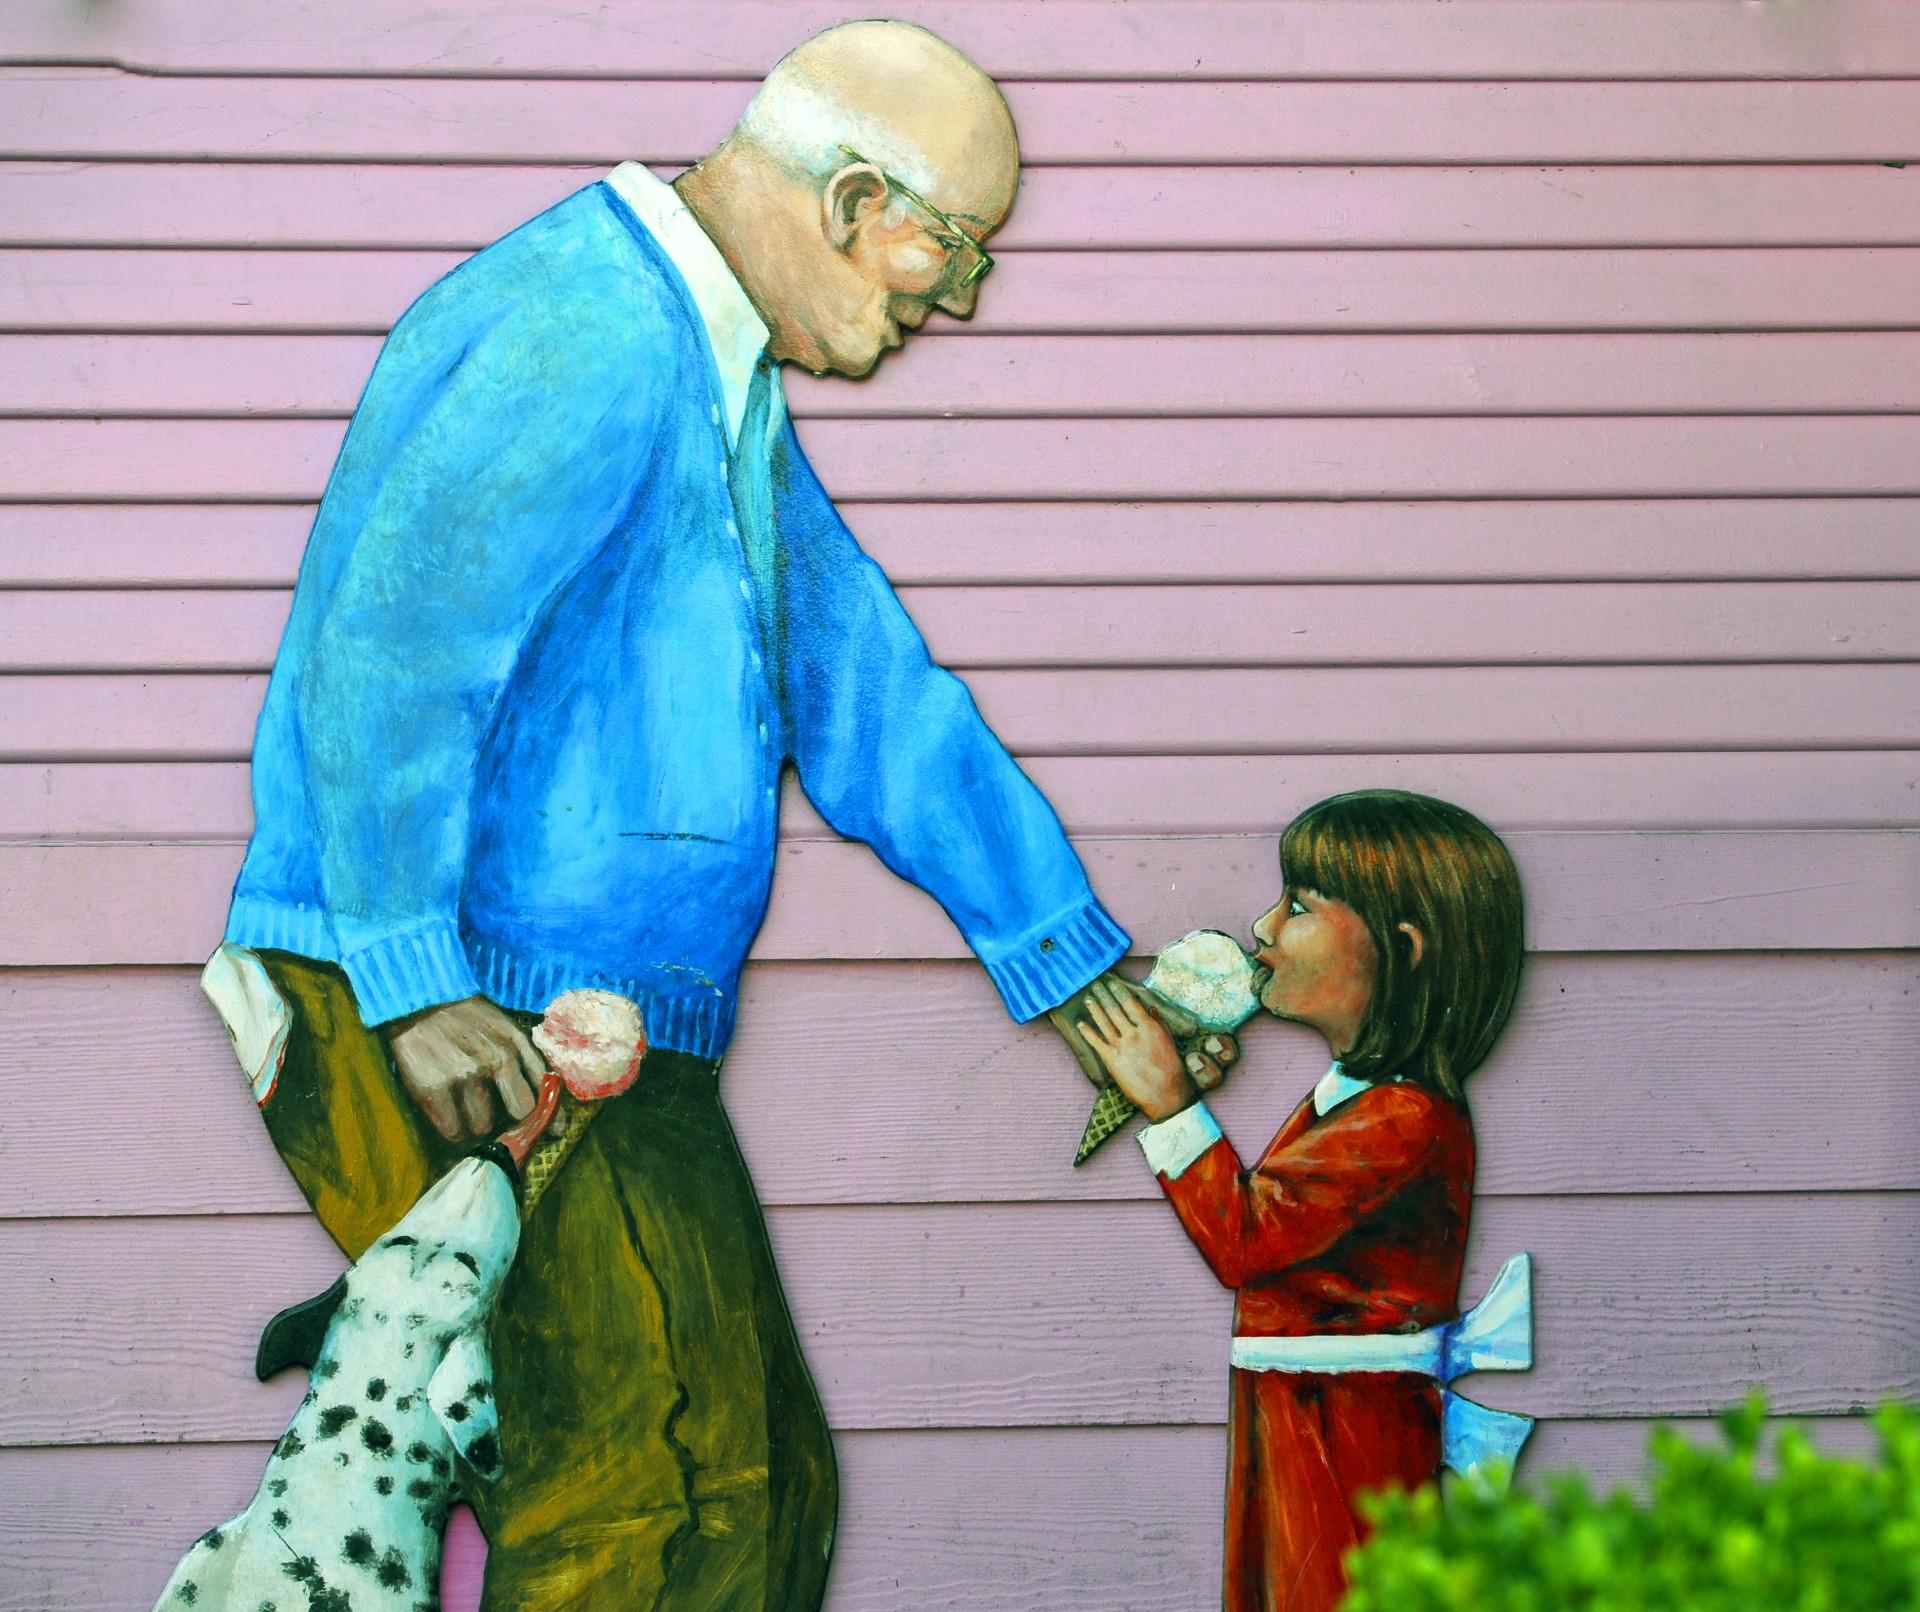 realistic looking painting on the side of an ice creme store of a grandfather, granddaughter and dalmatian dog enjoying ice creme